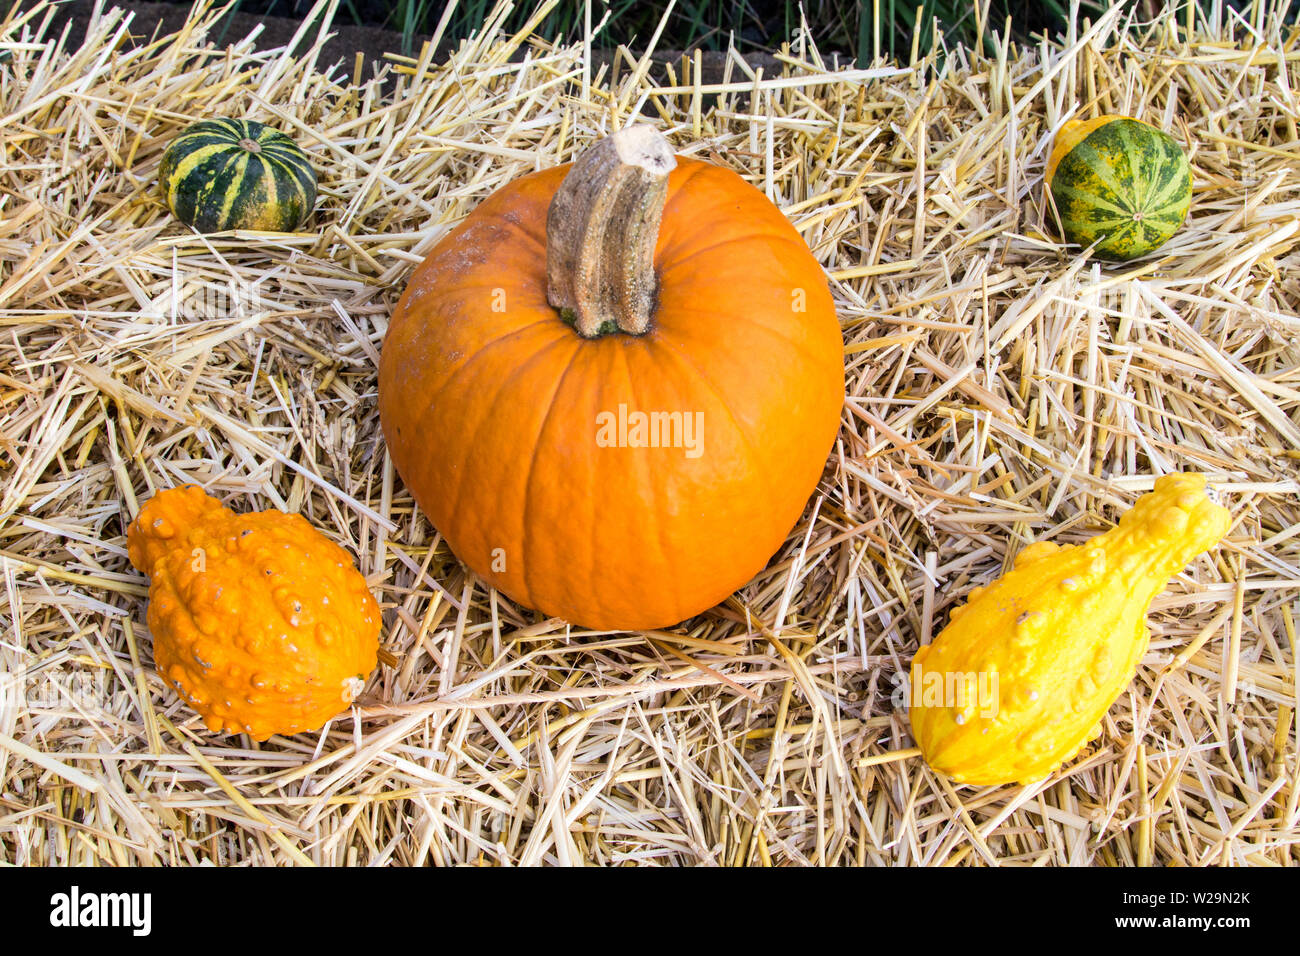 Autumn Harvest Background. Pumpkins, squash and gourds on a hay bale. Stock Photo